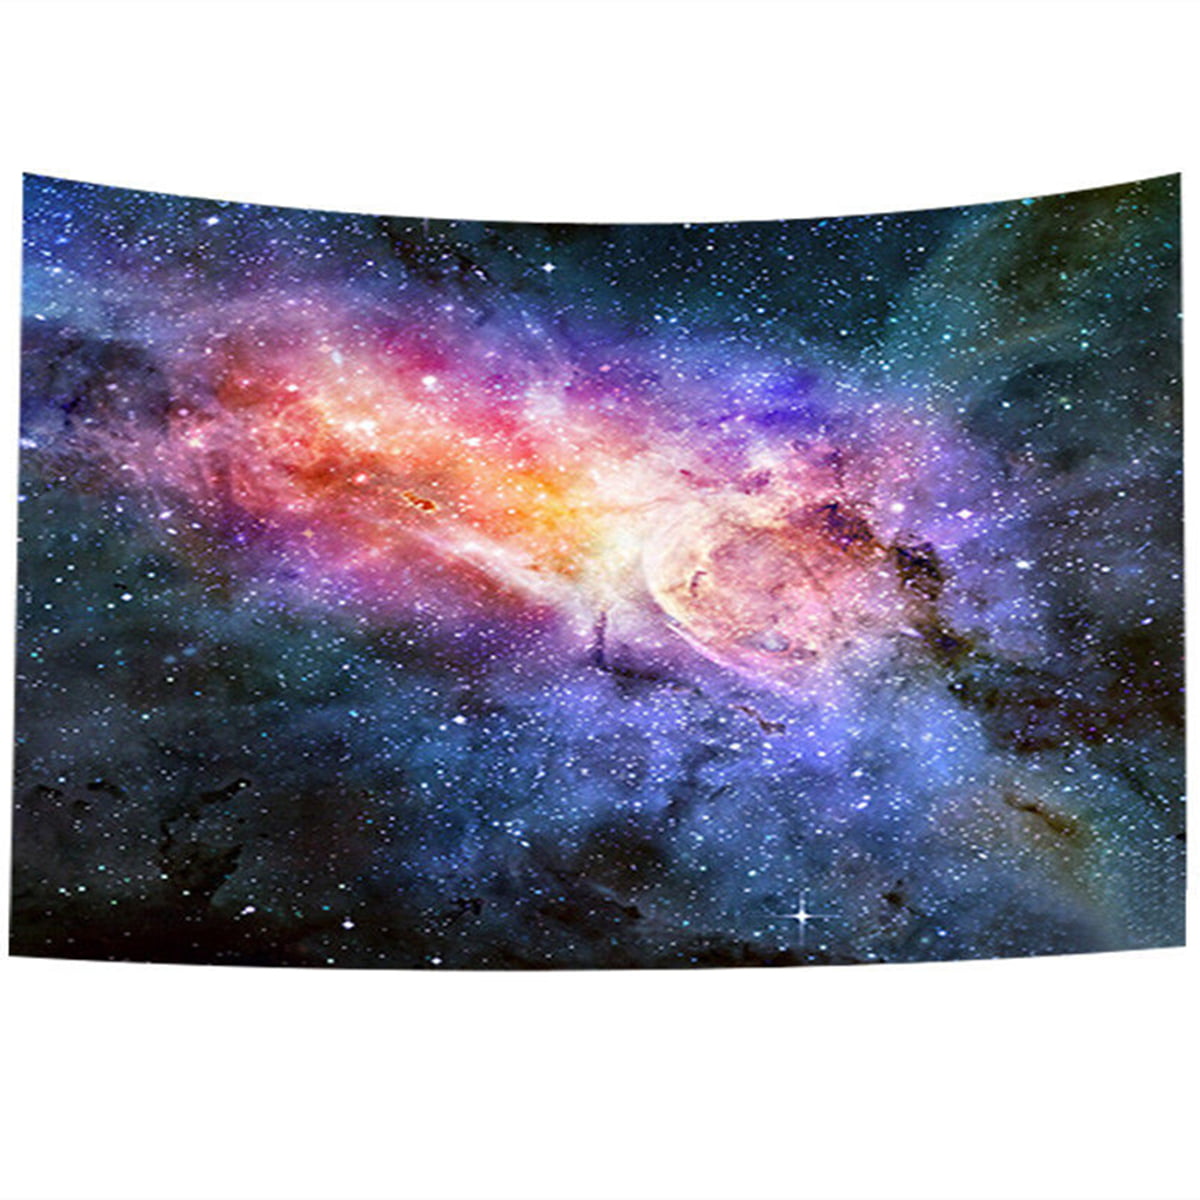 Galaxy Nebula Wall Hanging Tapestry Psychedelic Bedroom Home Decoration